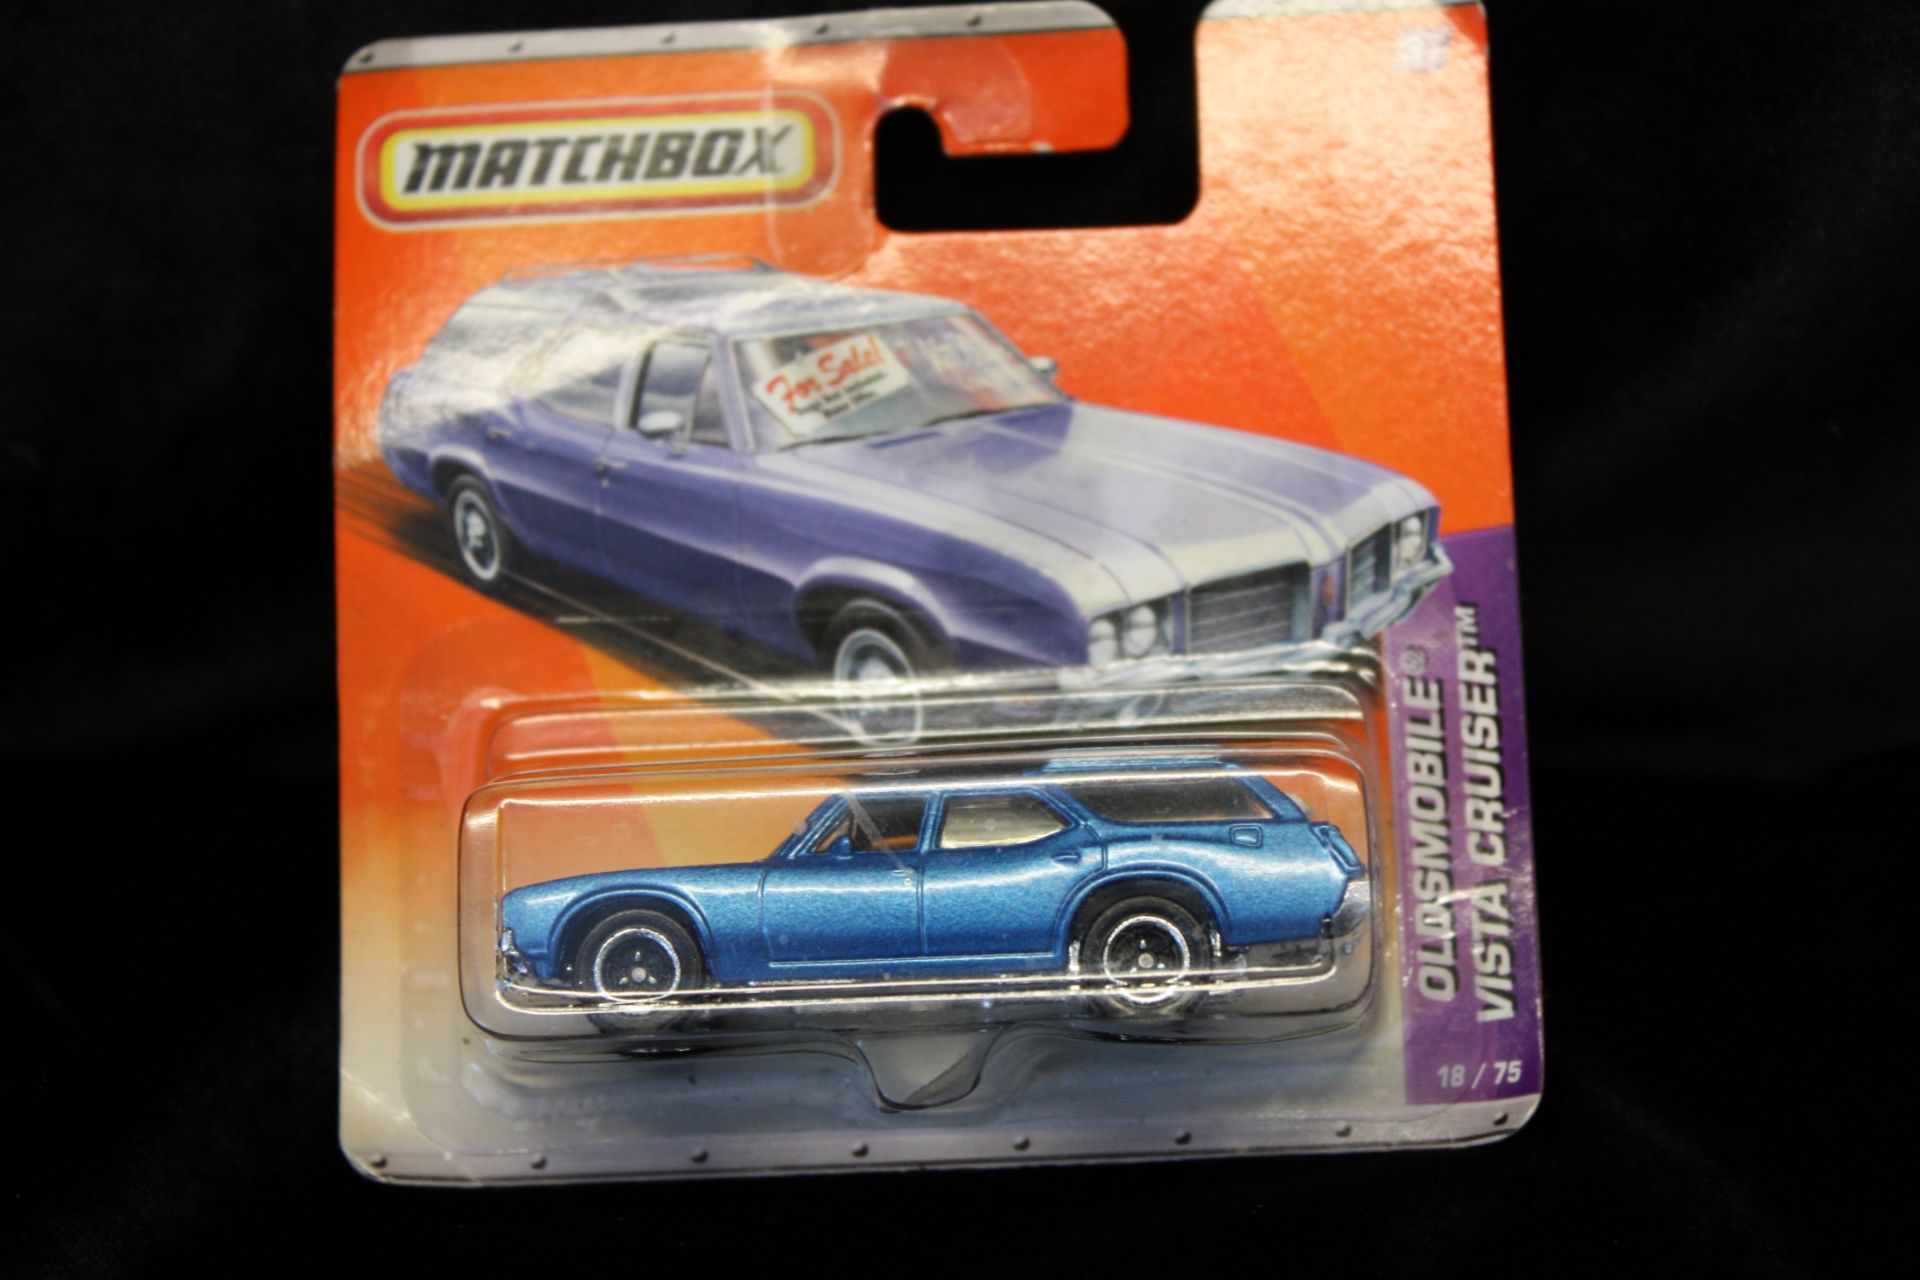 Matchbox Oldsmobile Vista Cruiser Blue 18/75. Model is part of an old private collection - All items